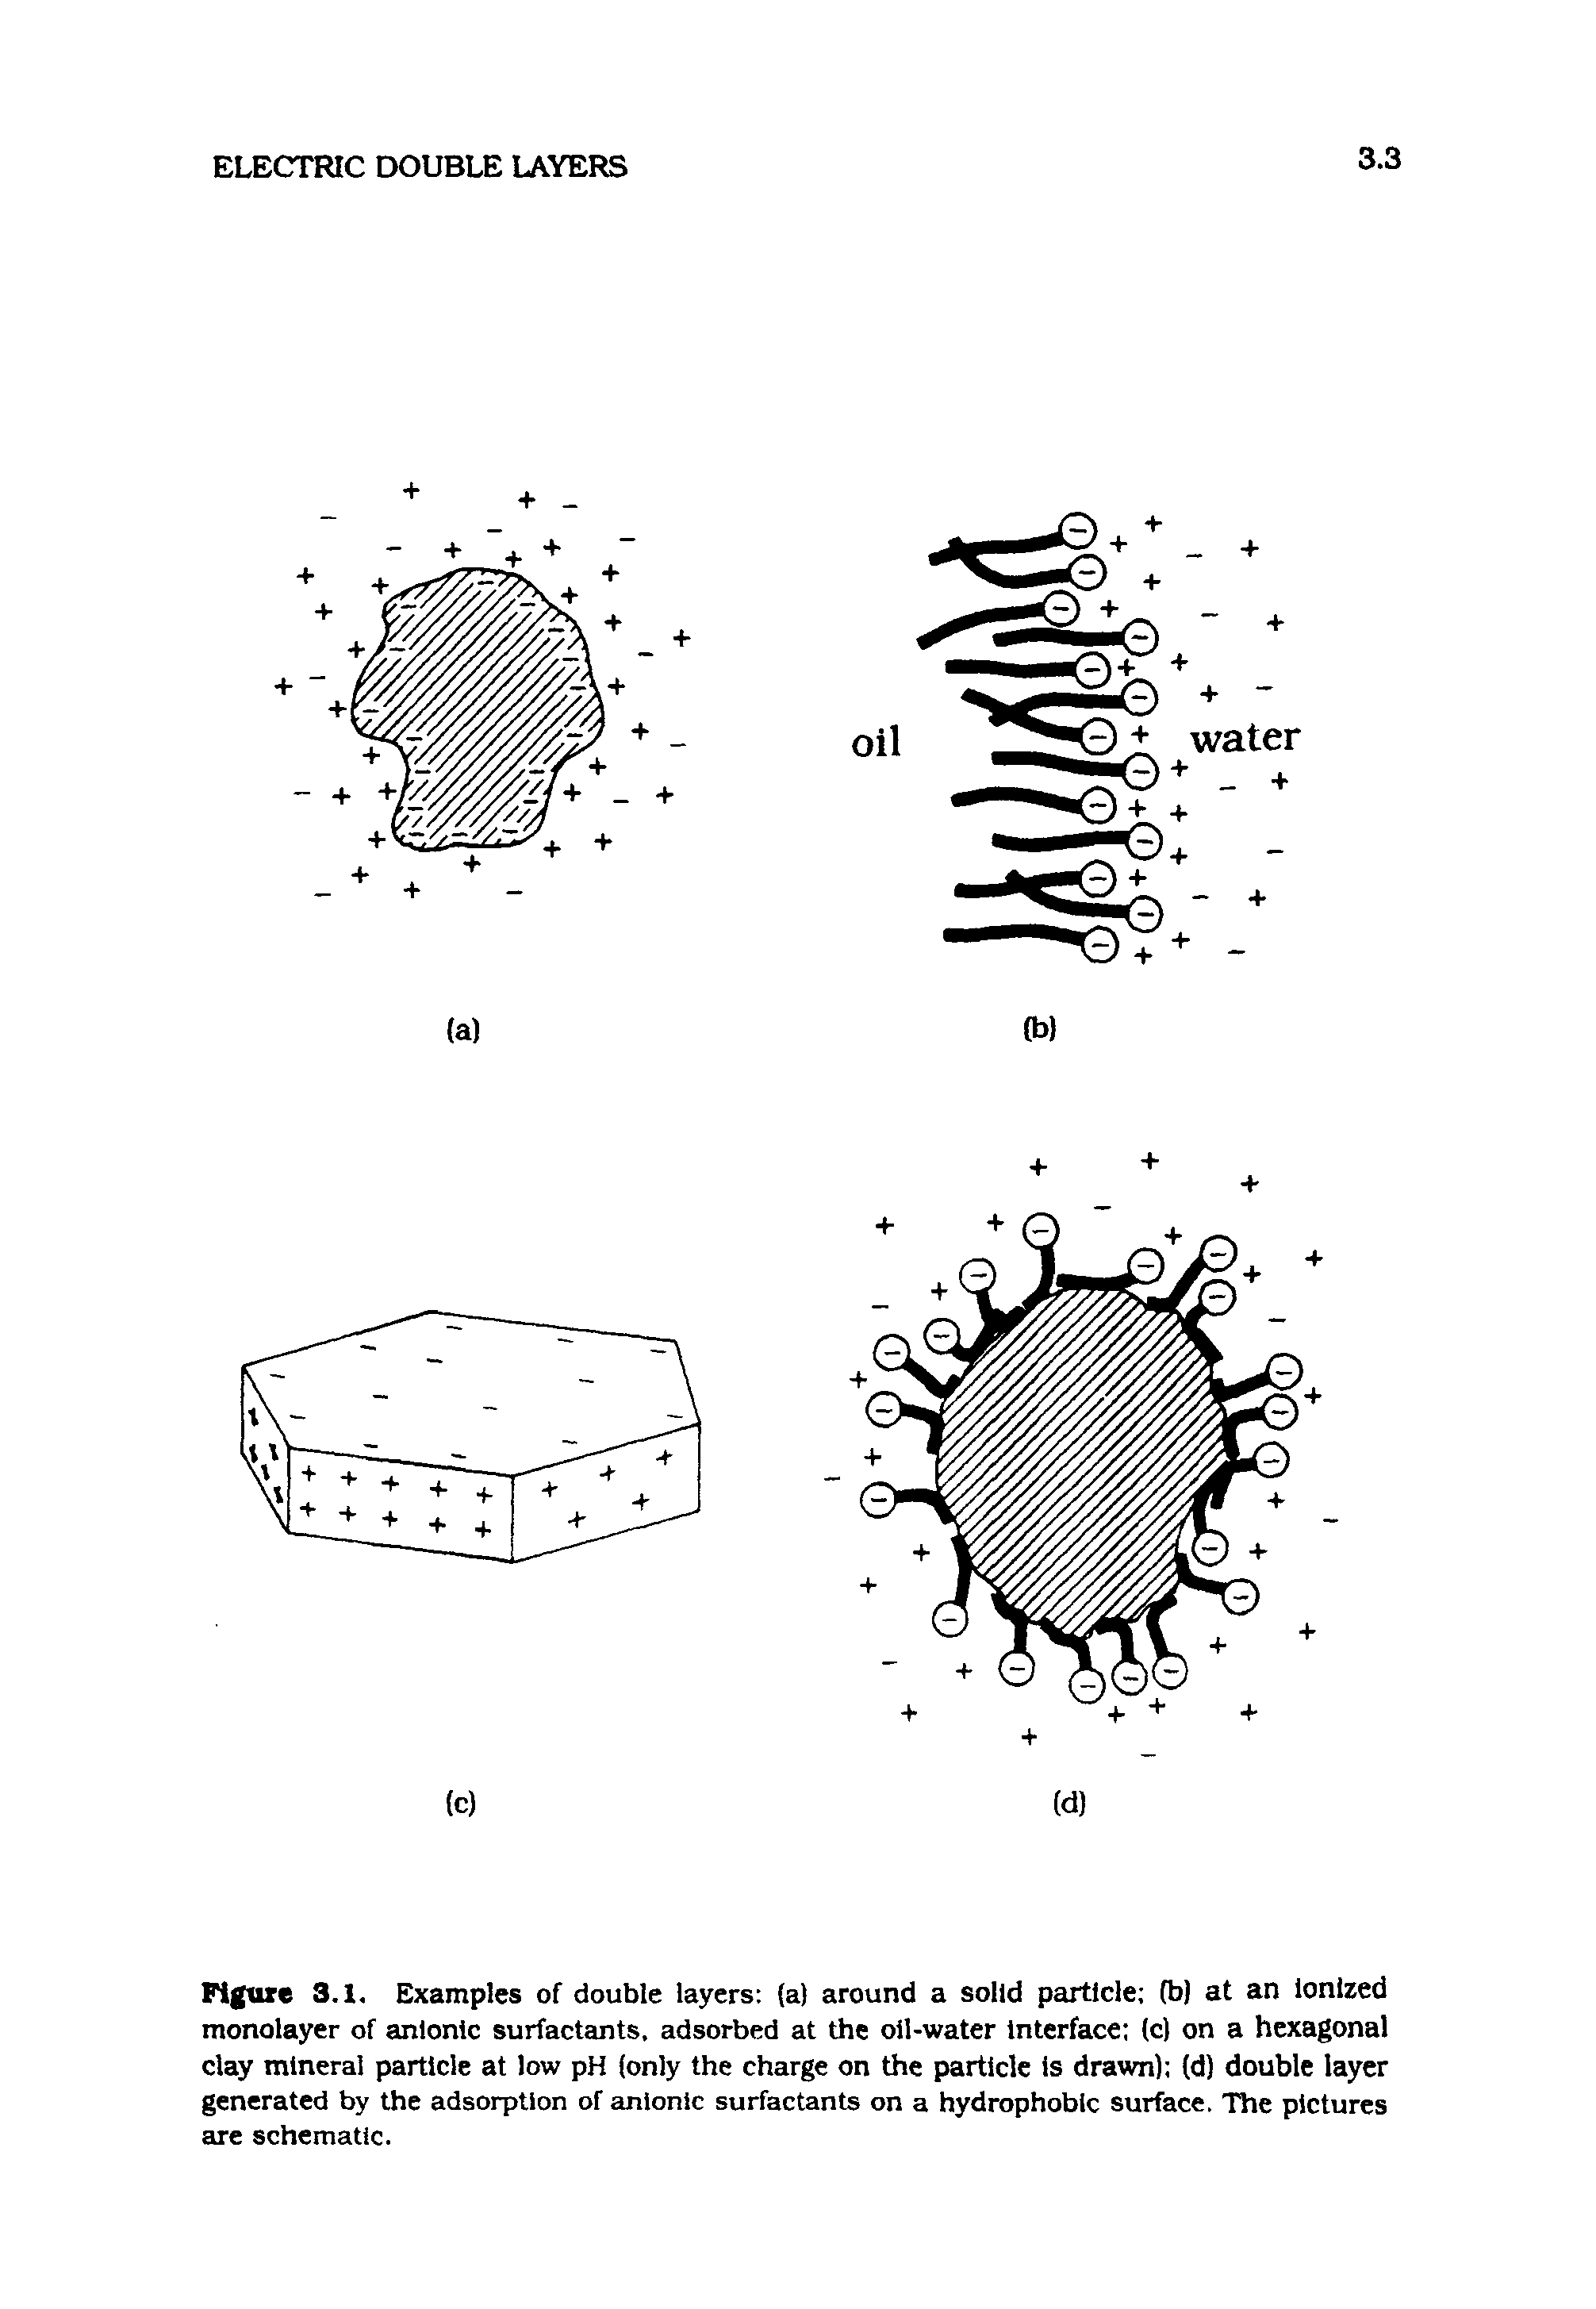 Figure 3.1. Examples of double layers (a) around a solid particle (b) at an Ionized monolayer of anionic surfactants, adsorbed at the oil-water Interface (c) on a hexagonal clay mineral particle at low pH (only the charge on the particle is drawn) (d) double layer generated by the adsorption of anionic surfactants on a hydrophobic surface. The pictures are schematic.